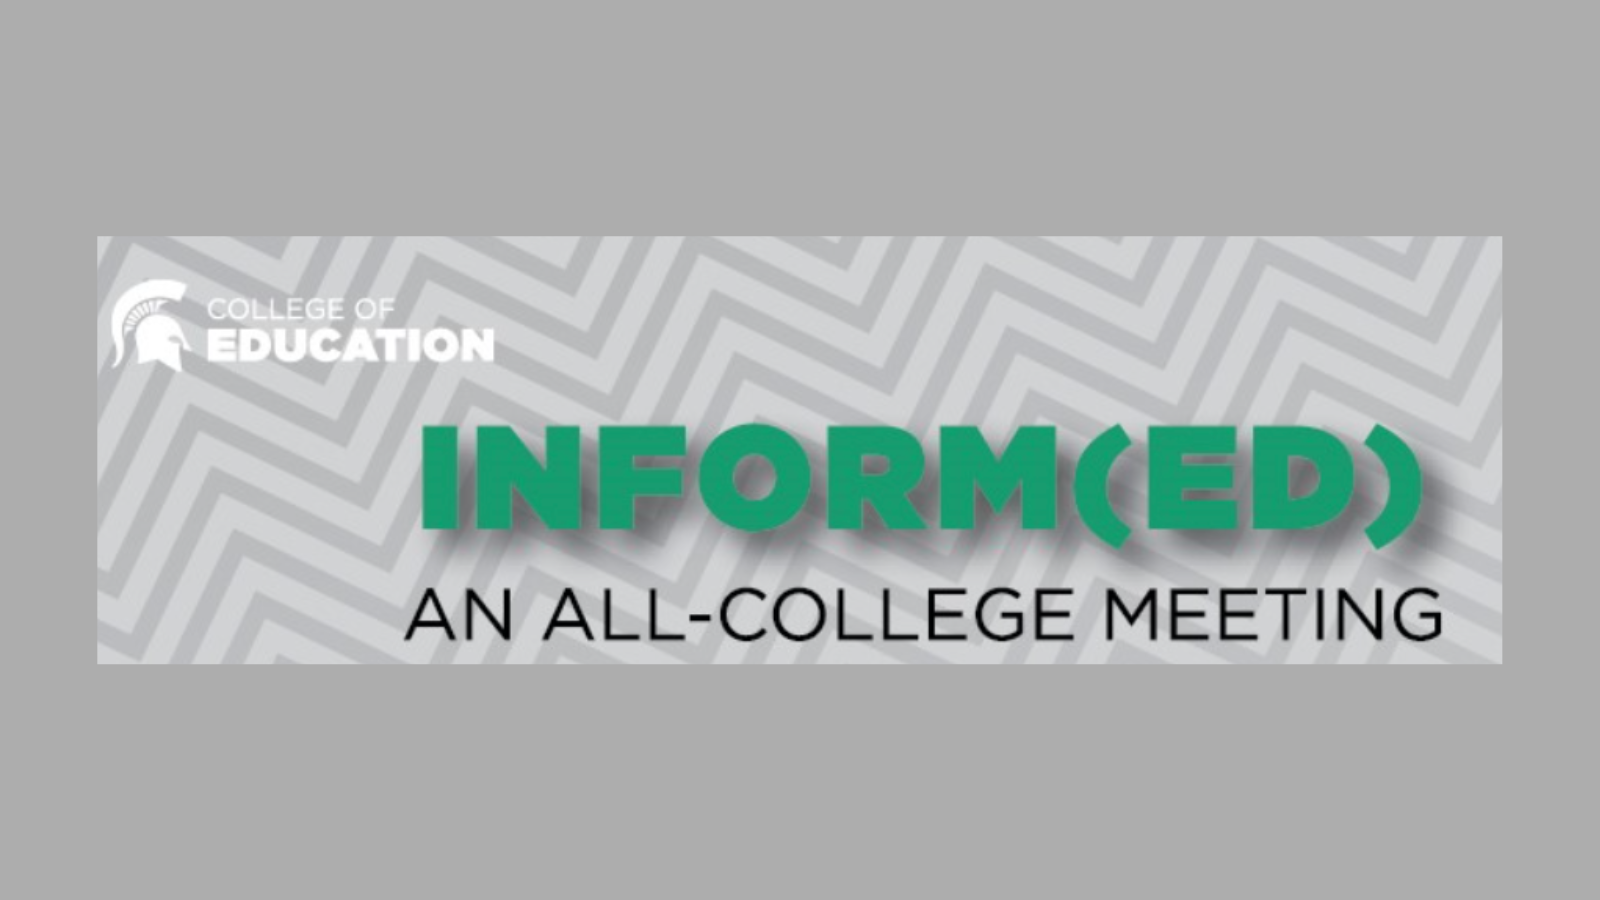 College of Education, INFORM(ED), An all-college meeting